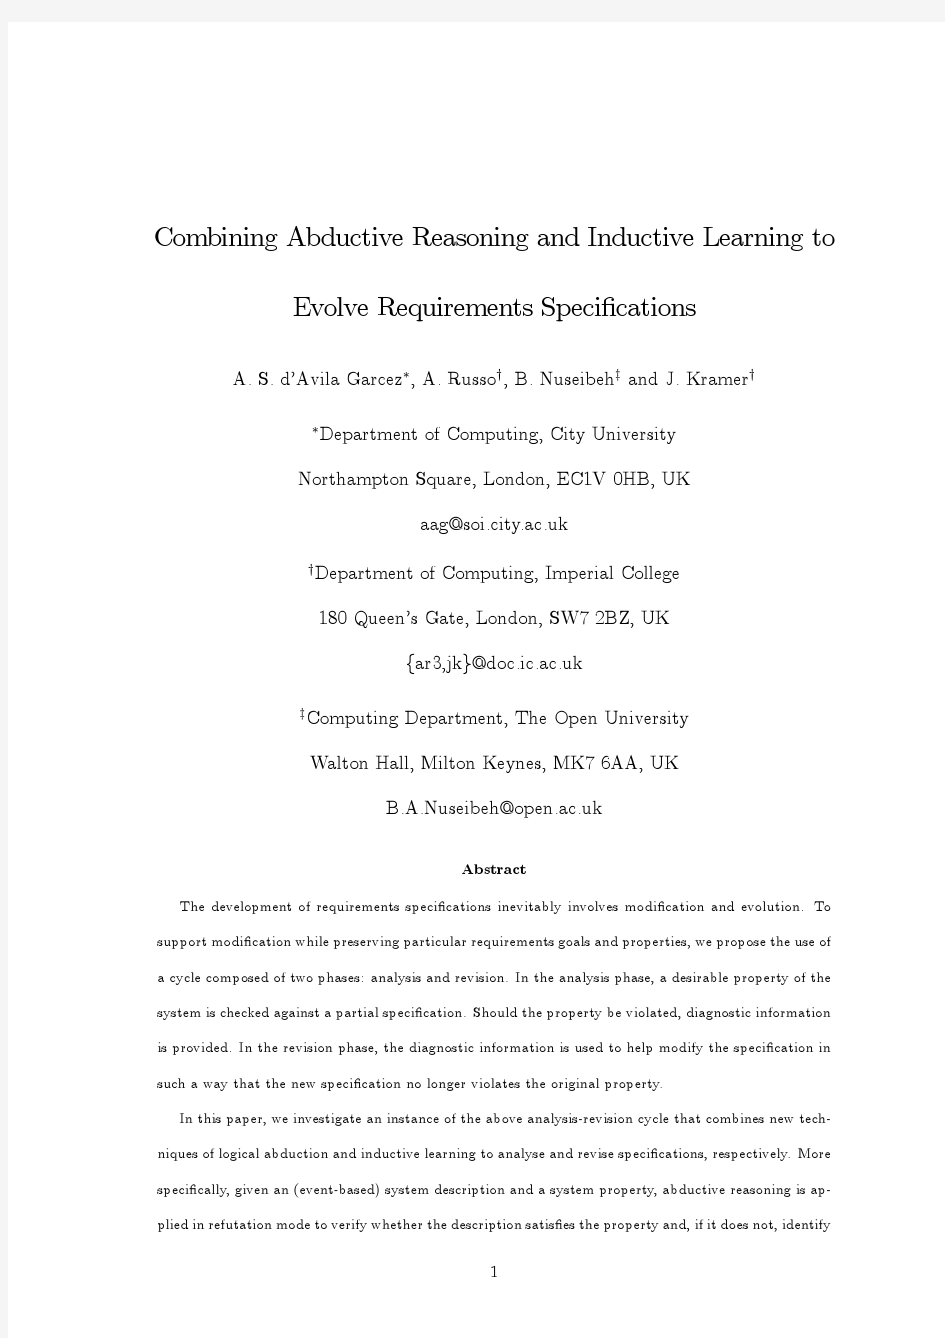 Combining abductive reasoning and inductive learning to evolve requirements specifications